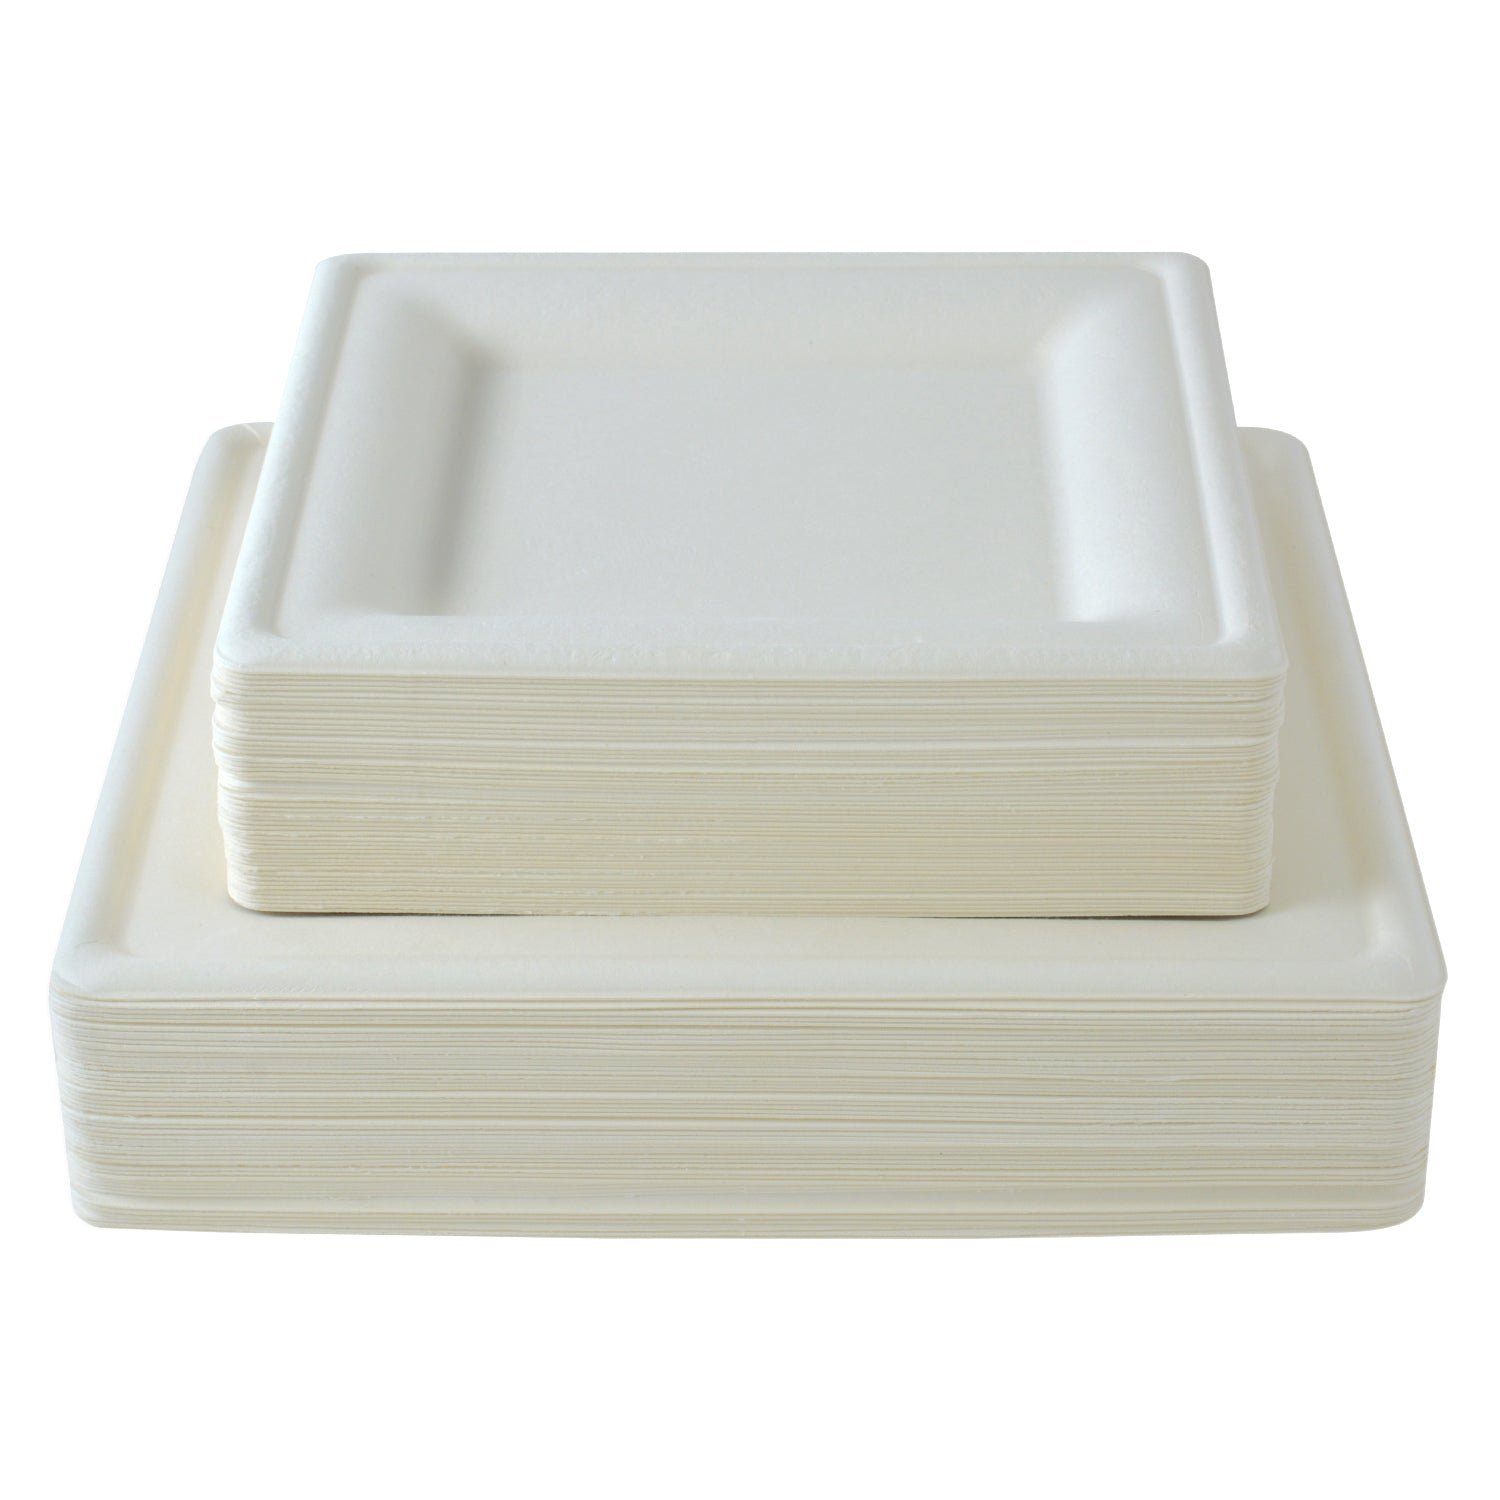 50 Count 100% Compostable 6-Inch Plates EcoQuality - Natural